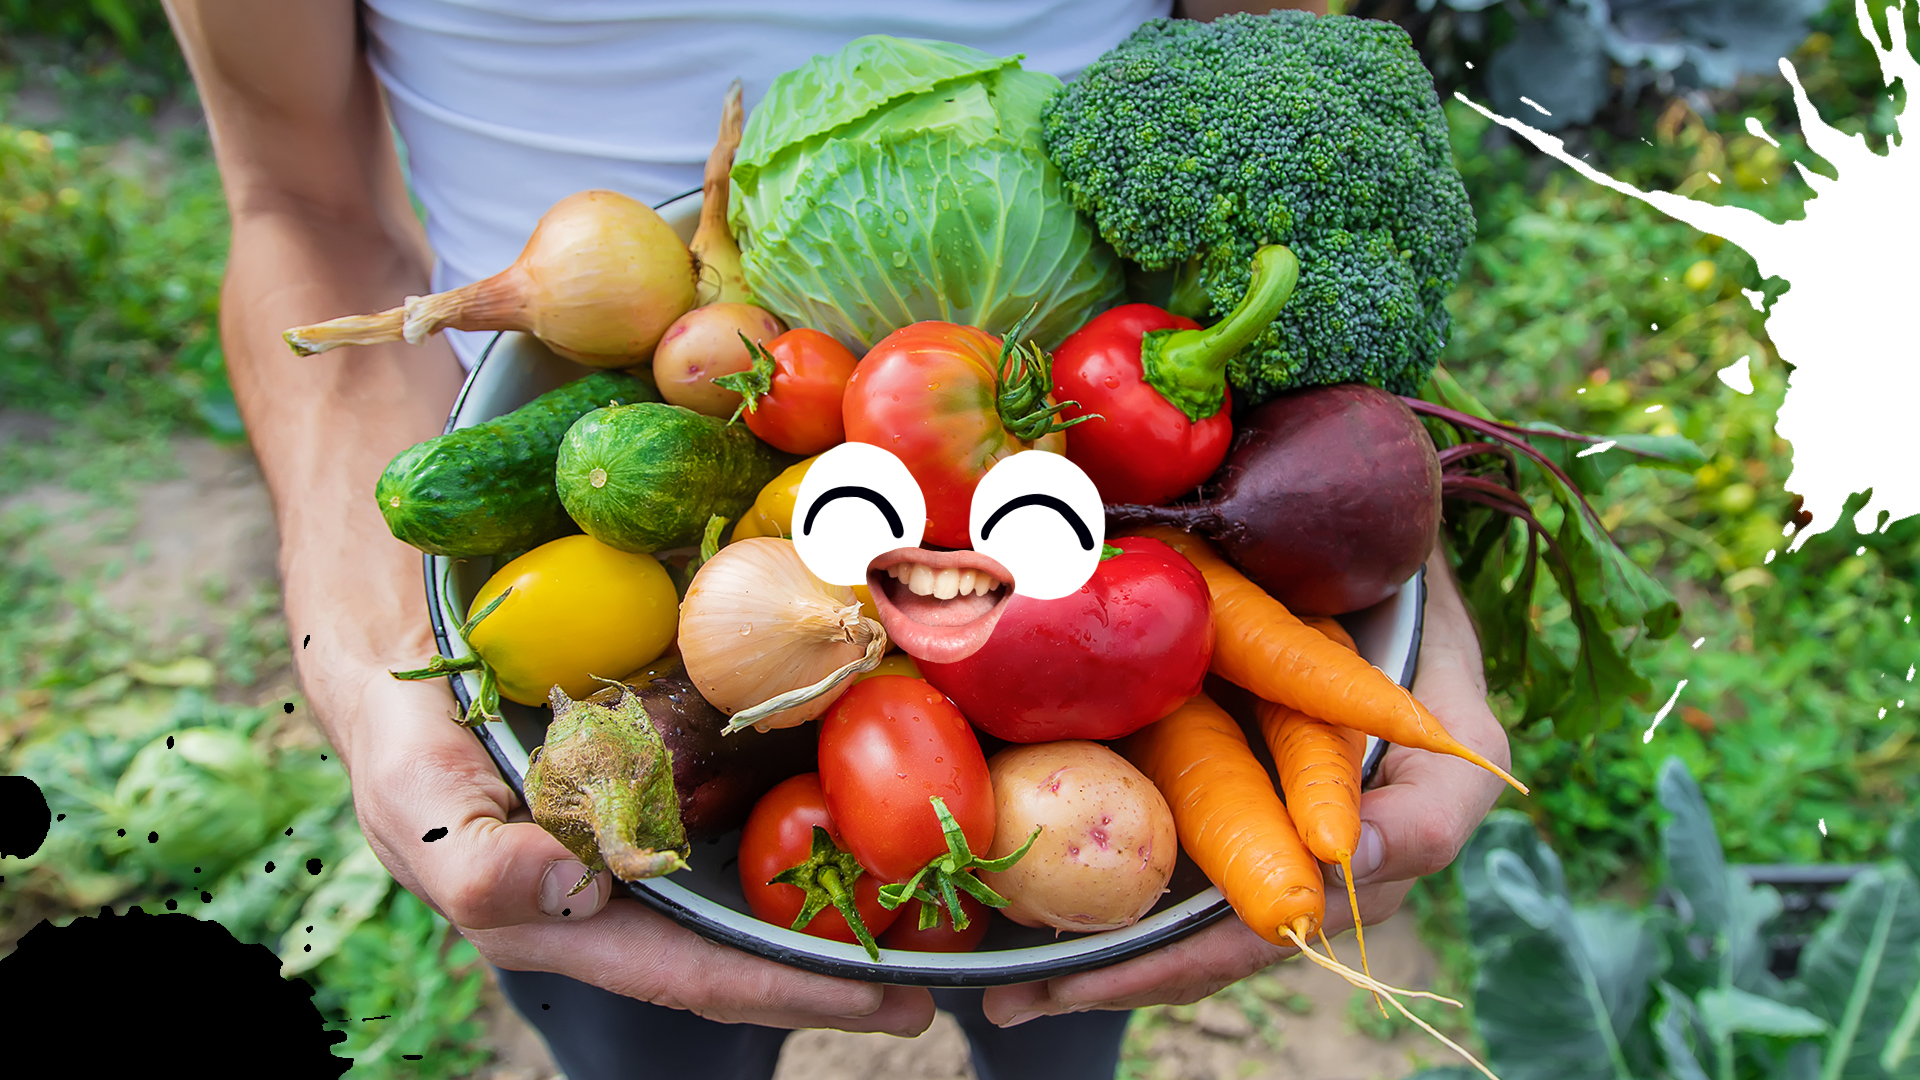 A healthy selection of vegetables